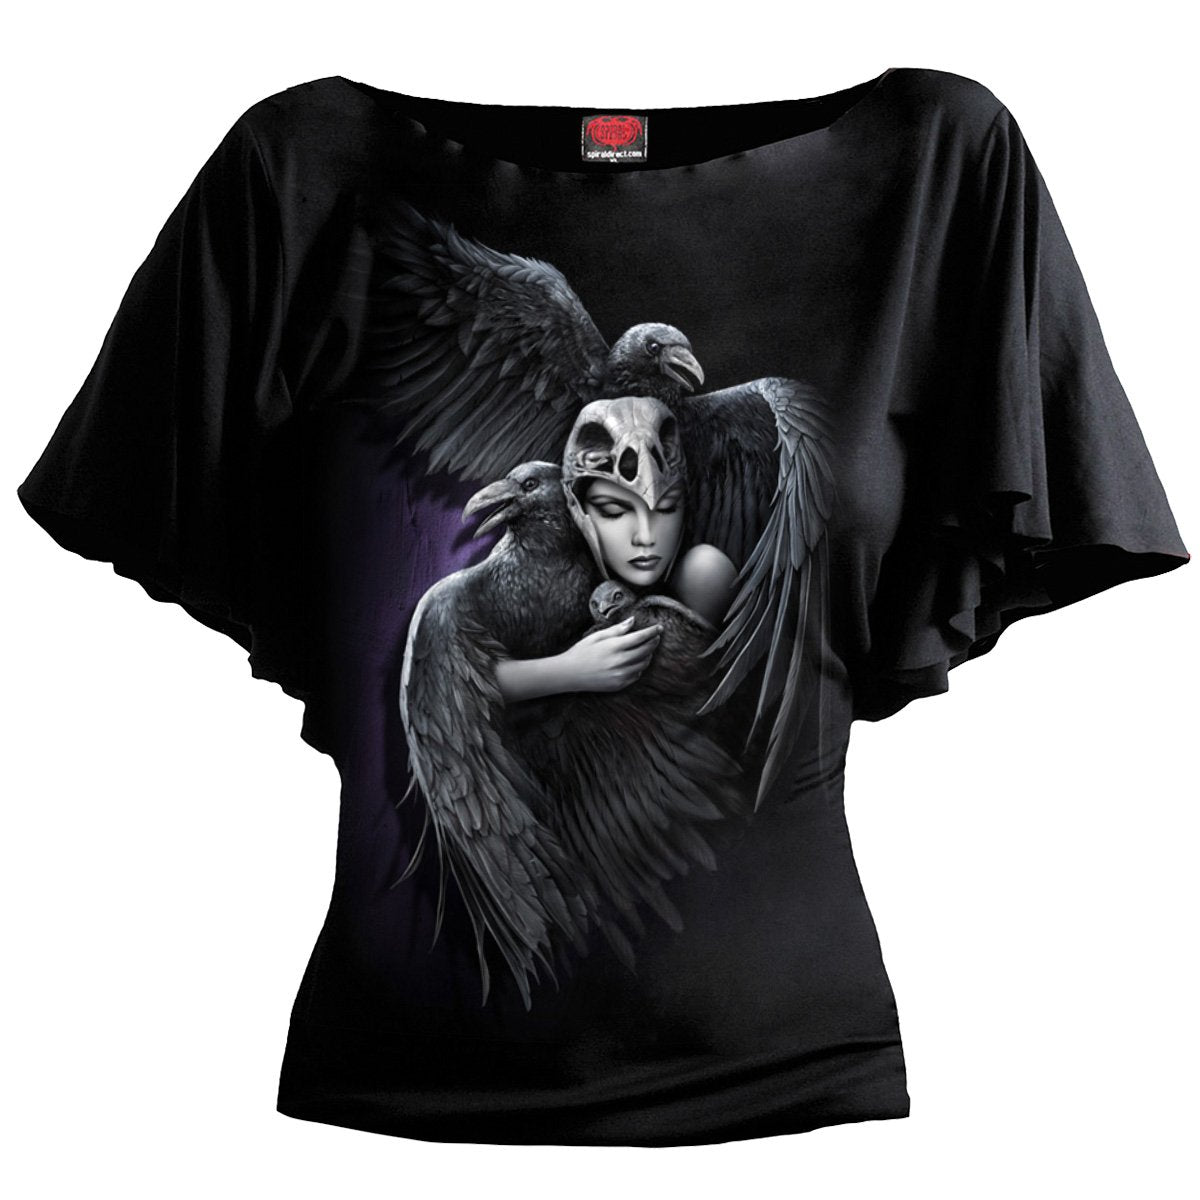 Spiral direct guardian angels Boat Neck Bat Sleeve Top Black new gothic